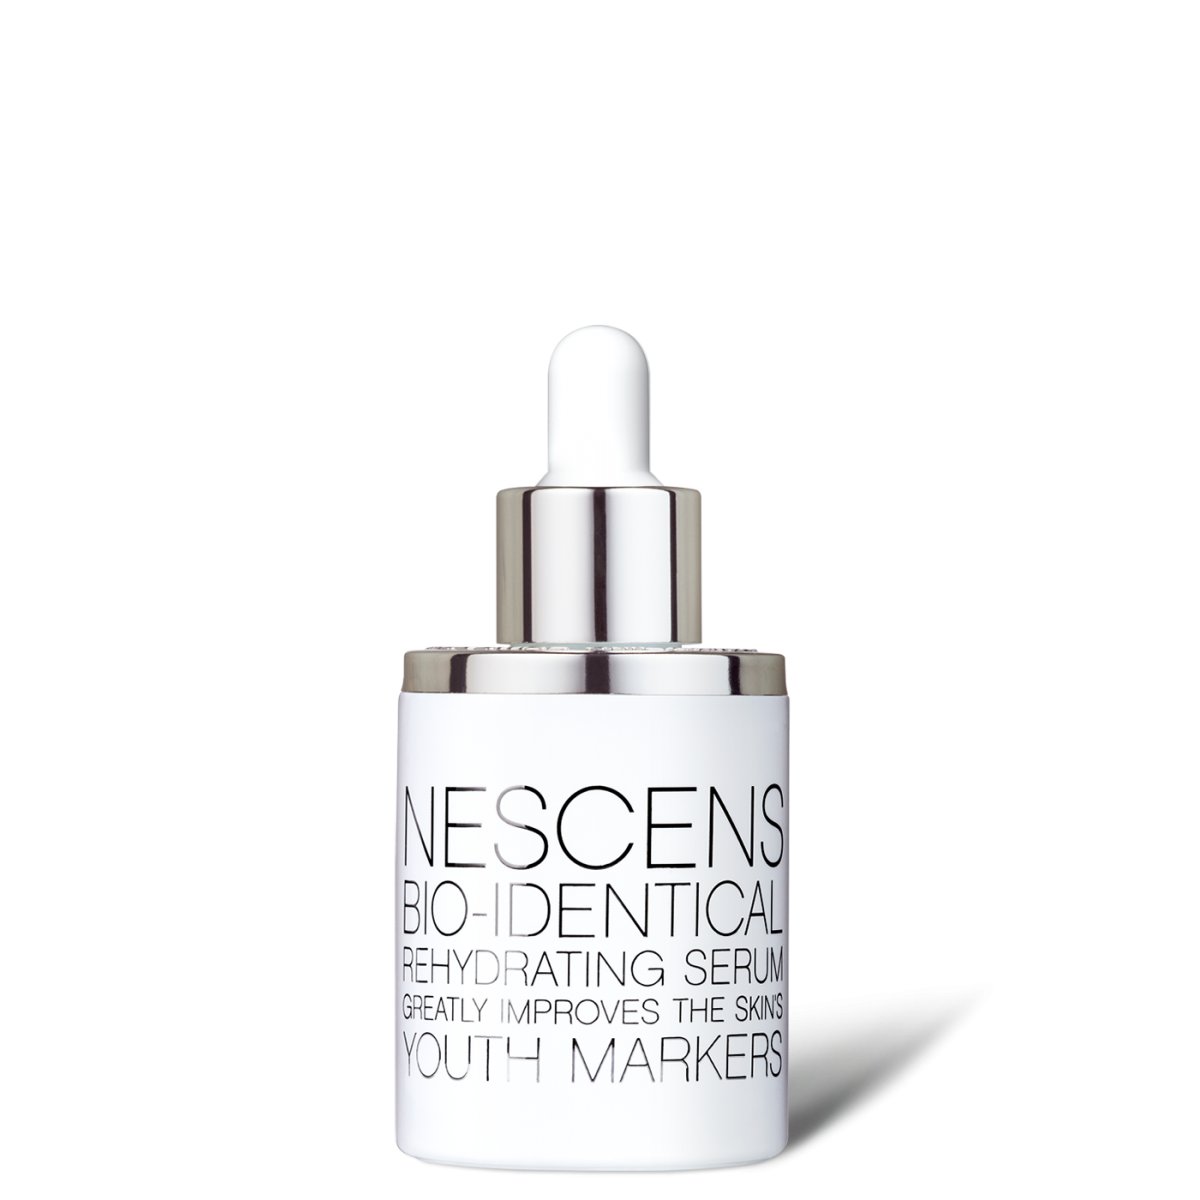 The Limited Edition Bio-Identical Rehydrating Serum - face reduces wrinkles and recovers the face's smooth and plump appearance